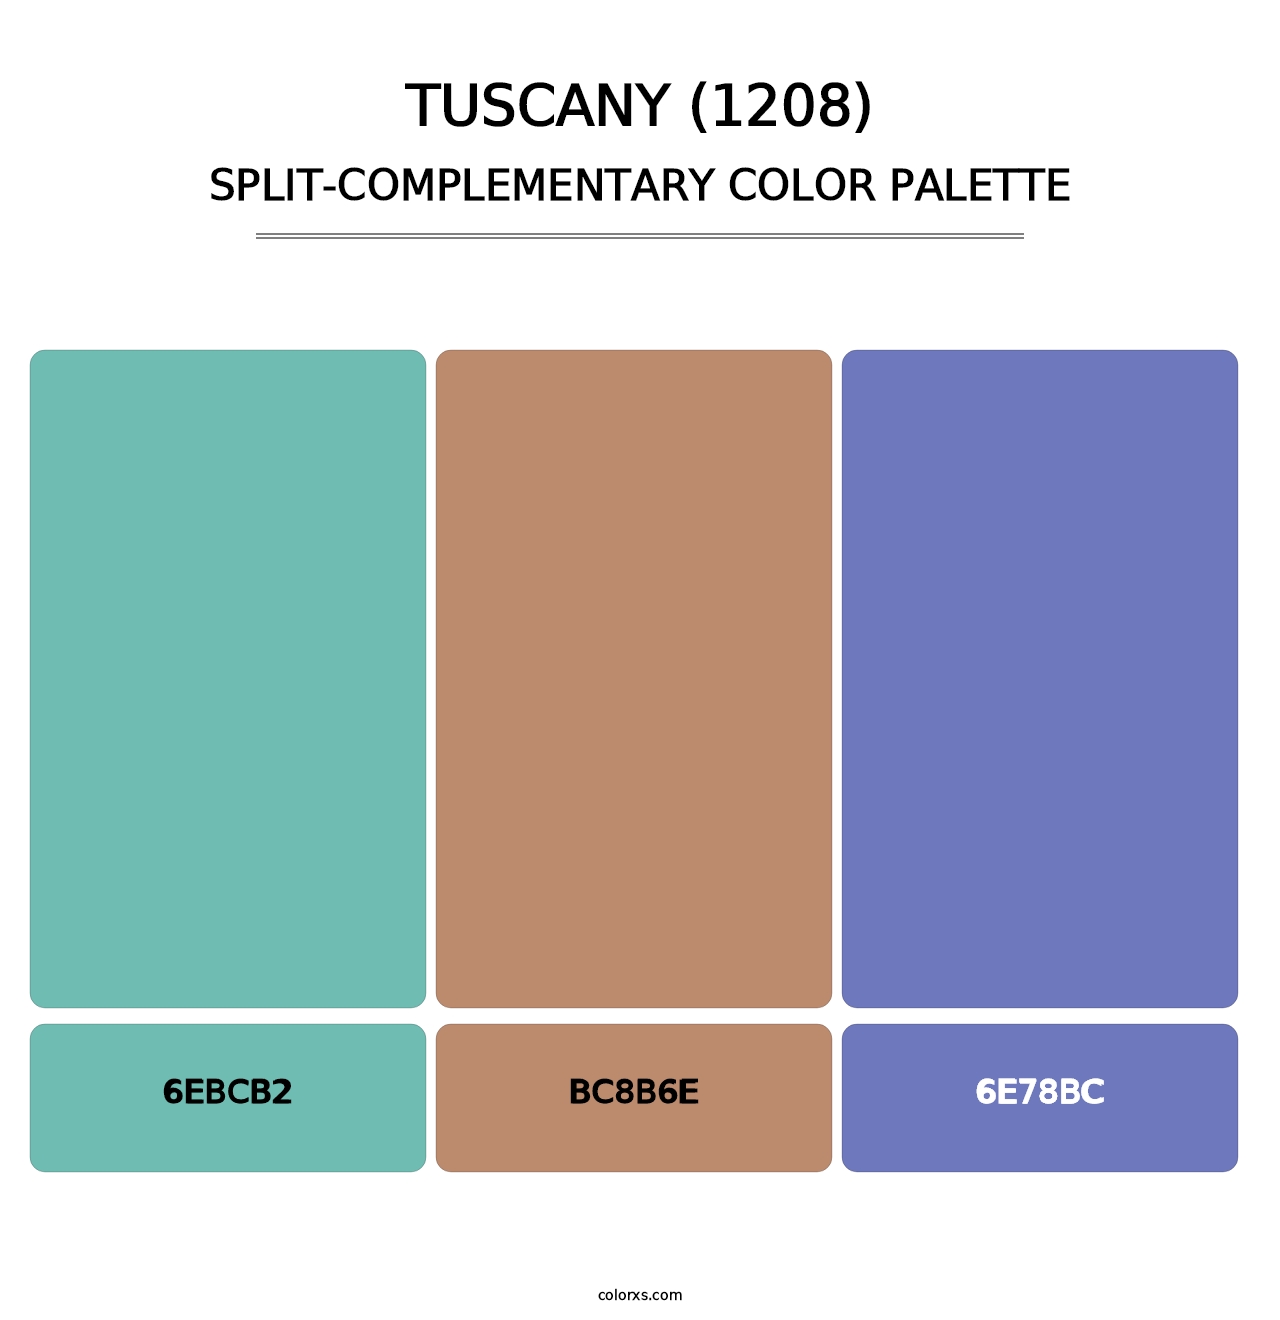 Tuscany (1208) - Split-Complementary Color Palette